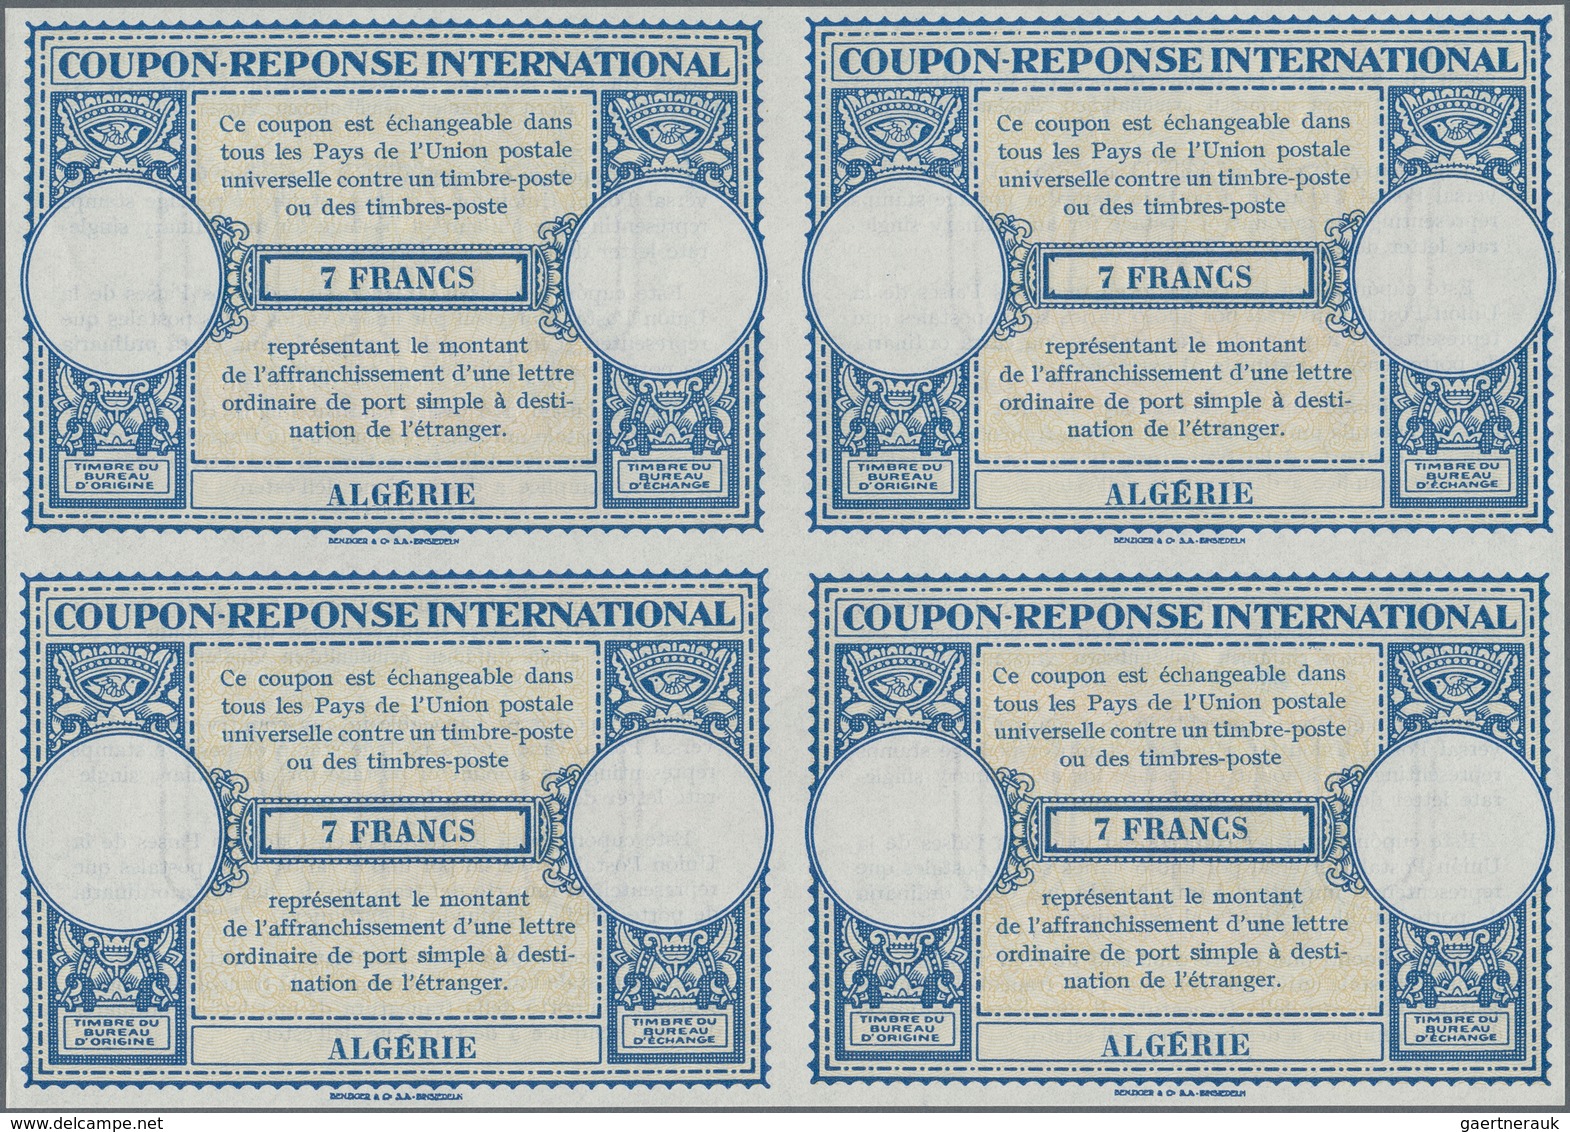 Algerien: 1940s (approx). International Reply Coupon 7 Francs (London Type) In An Unused Block Of 4. - Briefe U. Dokumente